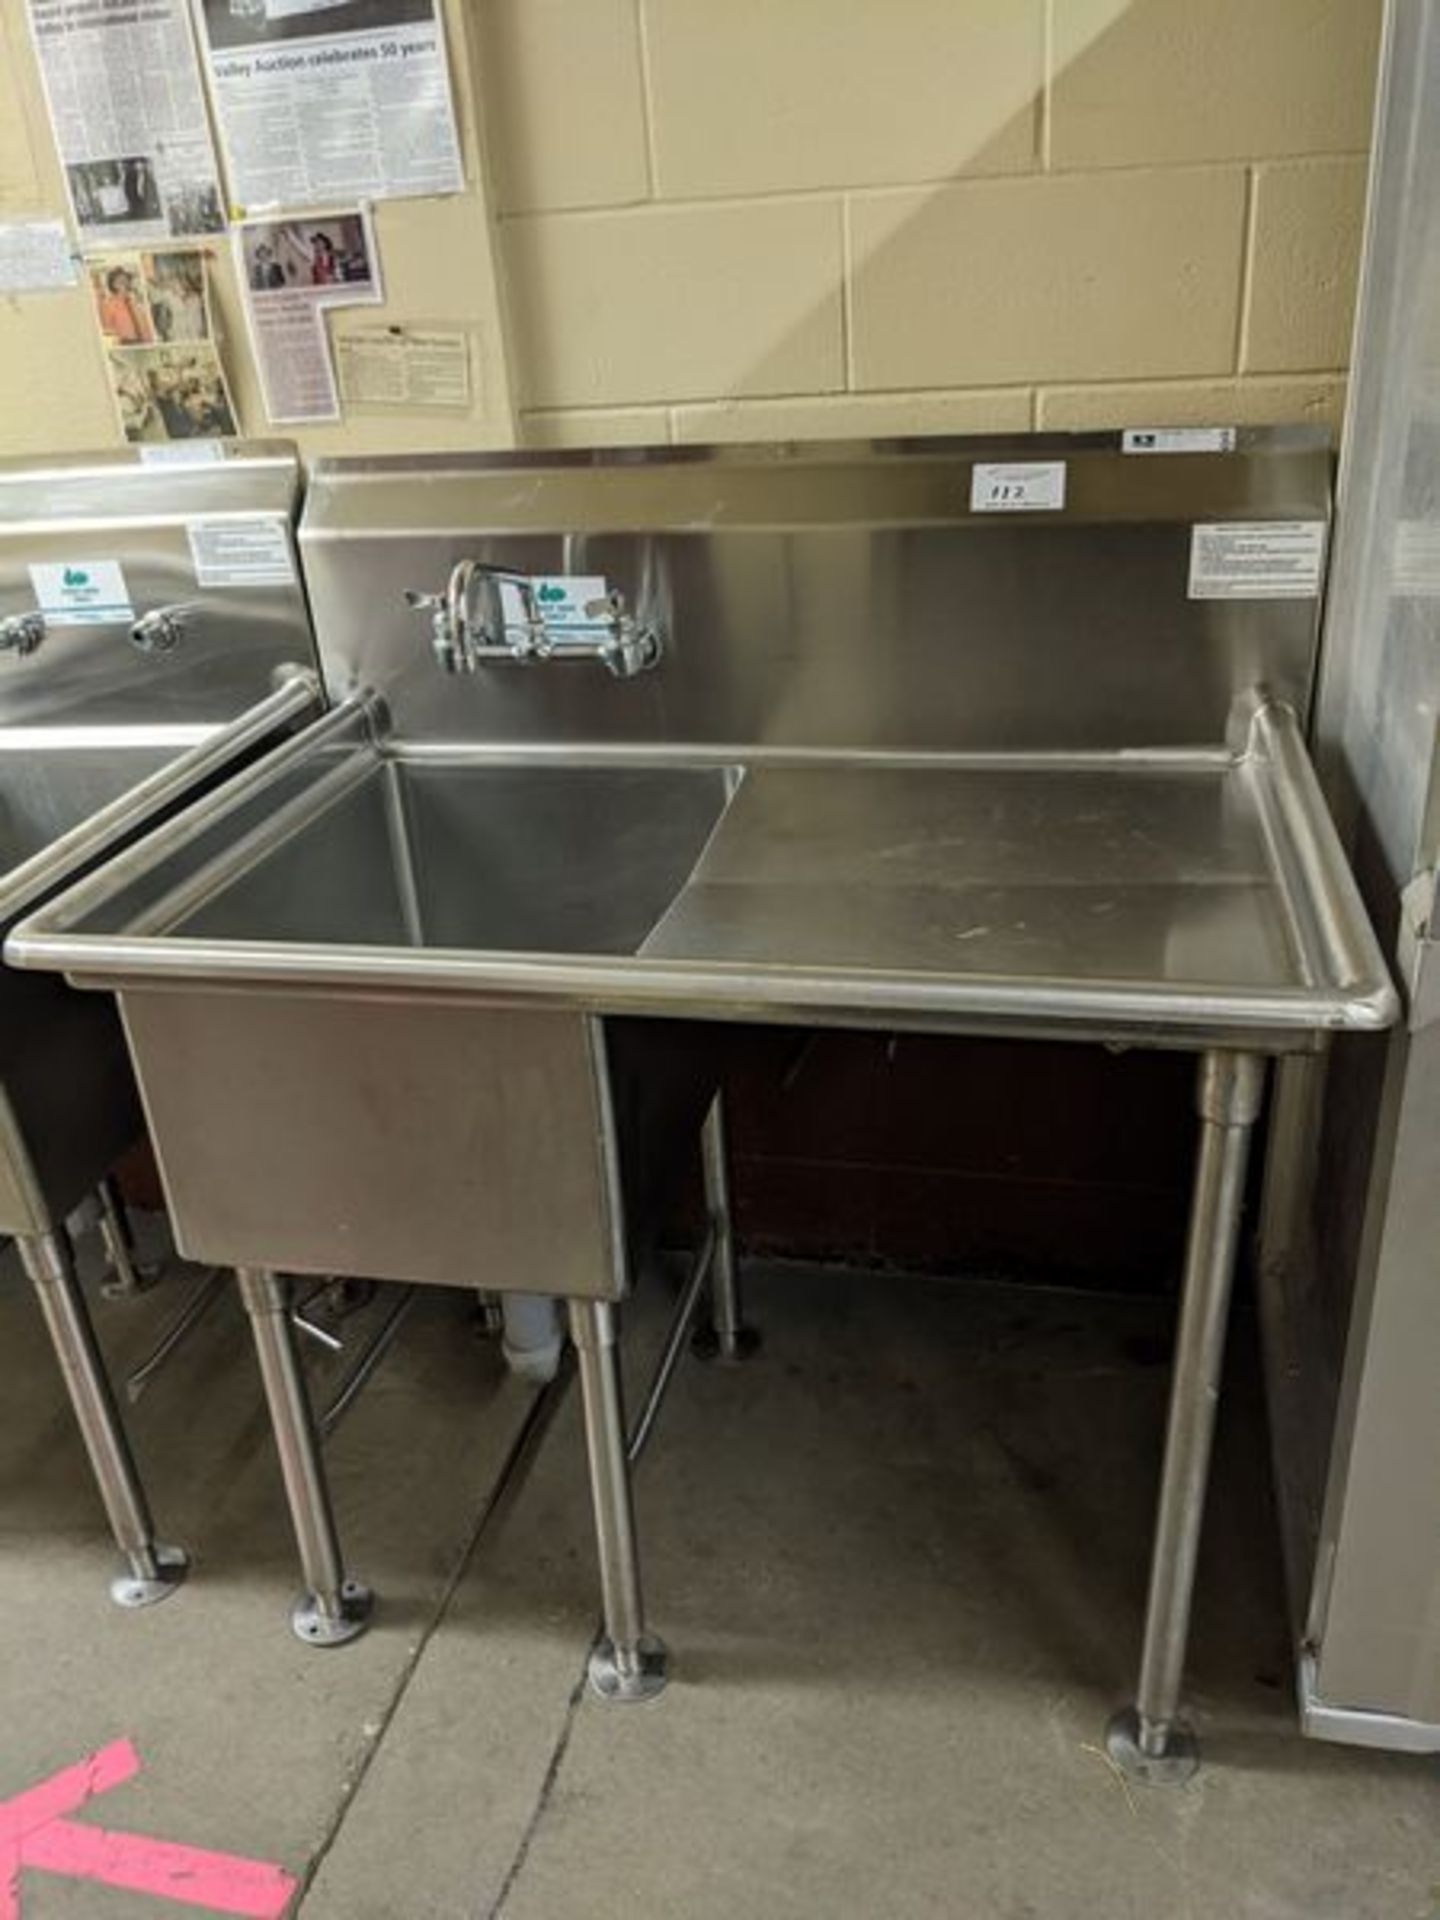 Load King 44" Single Compartment Sink with Right Run-off